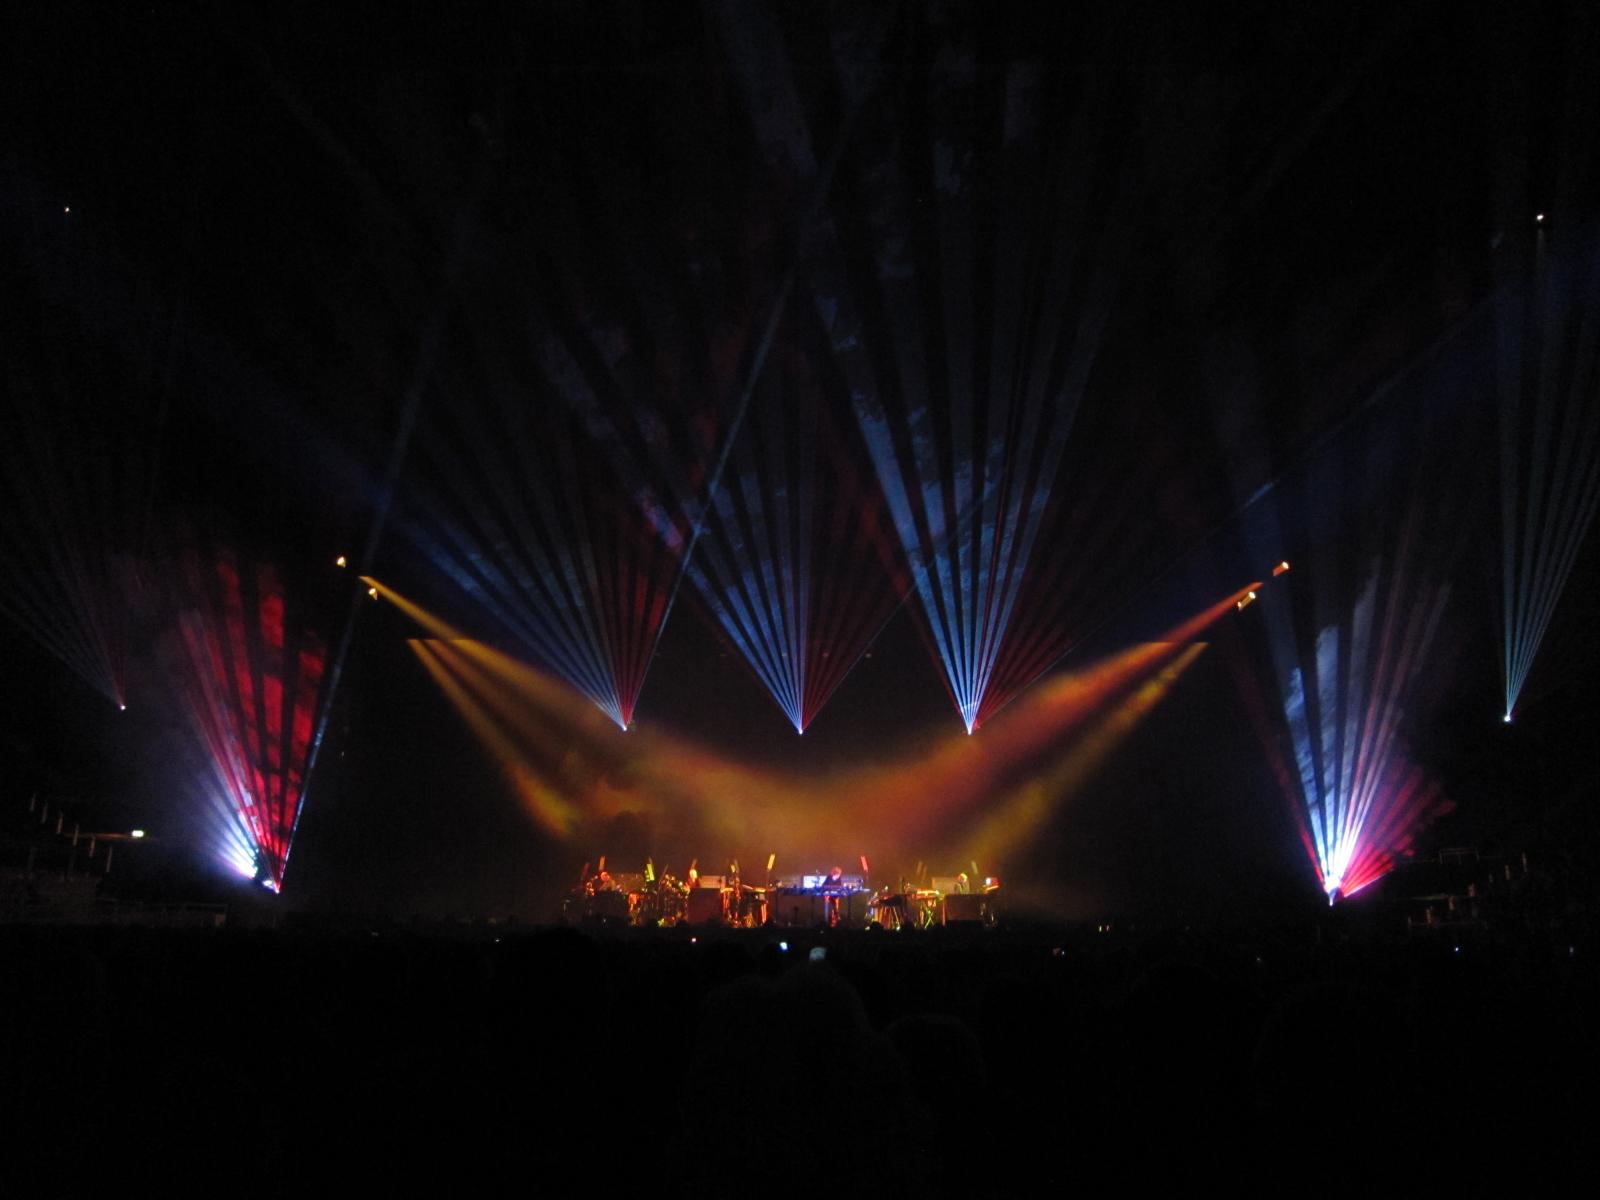 a concert with colorful lights in the dark